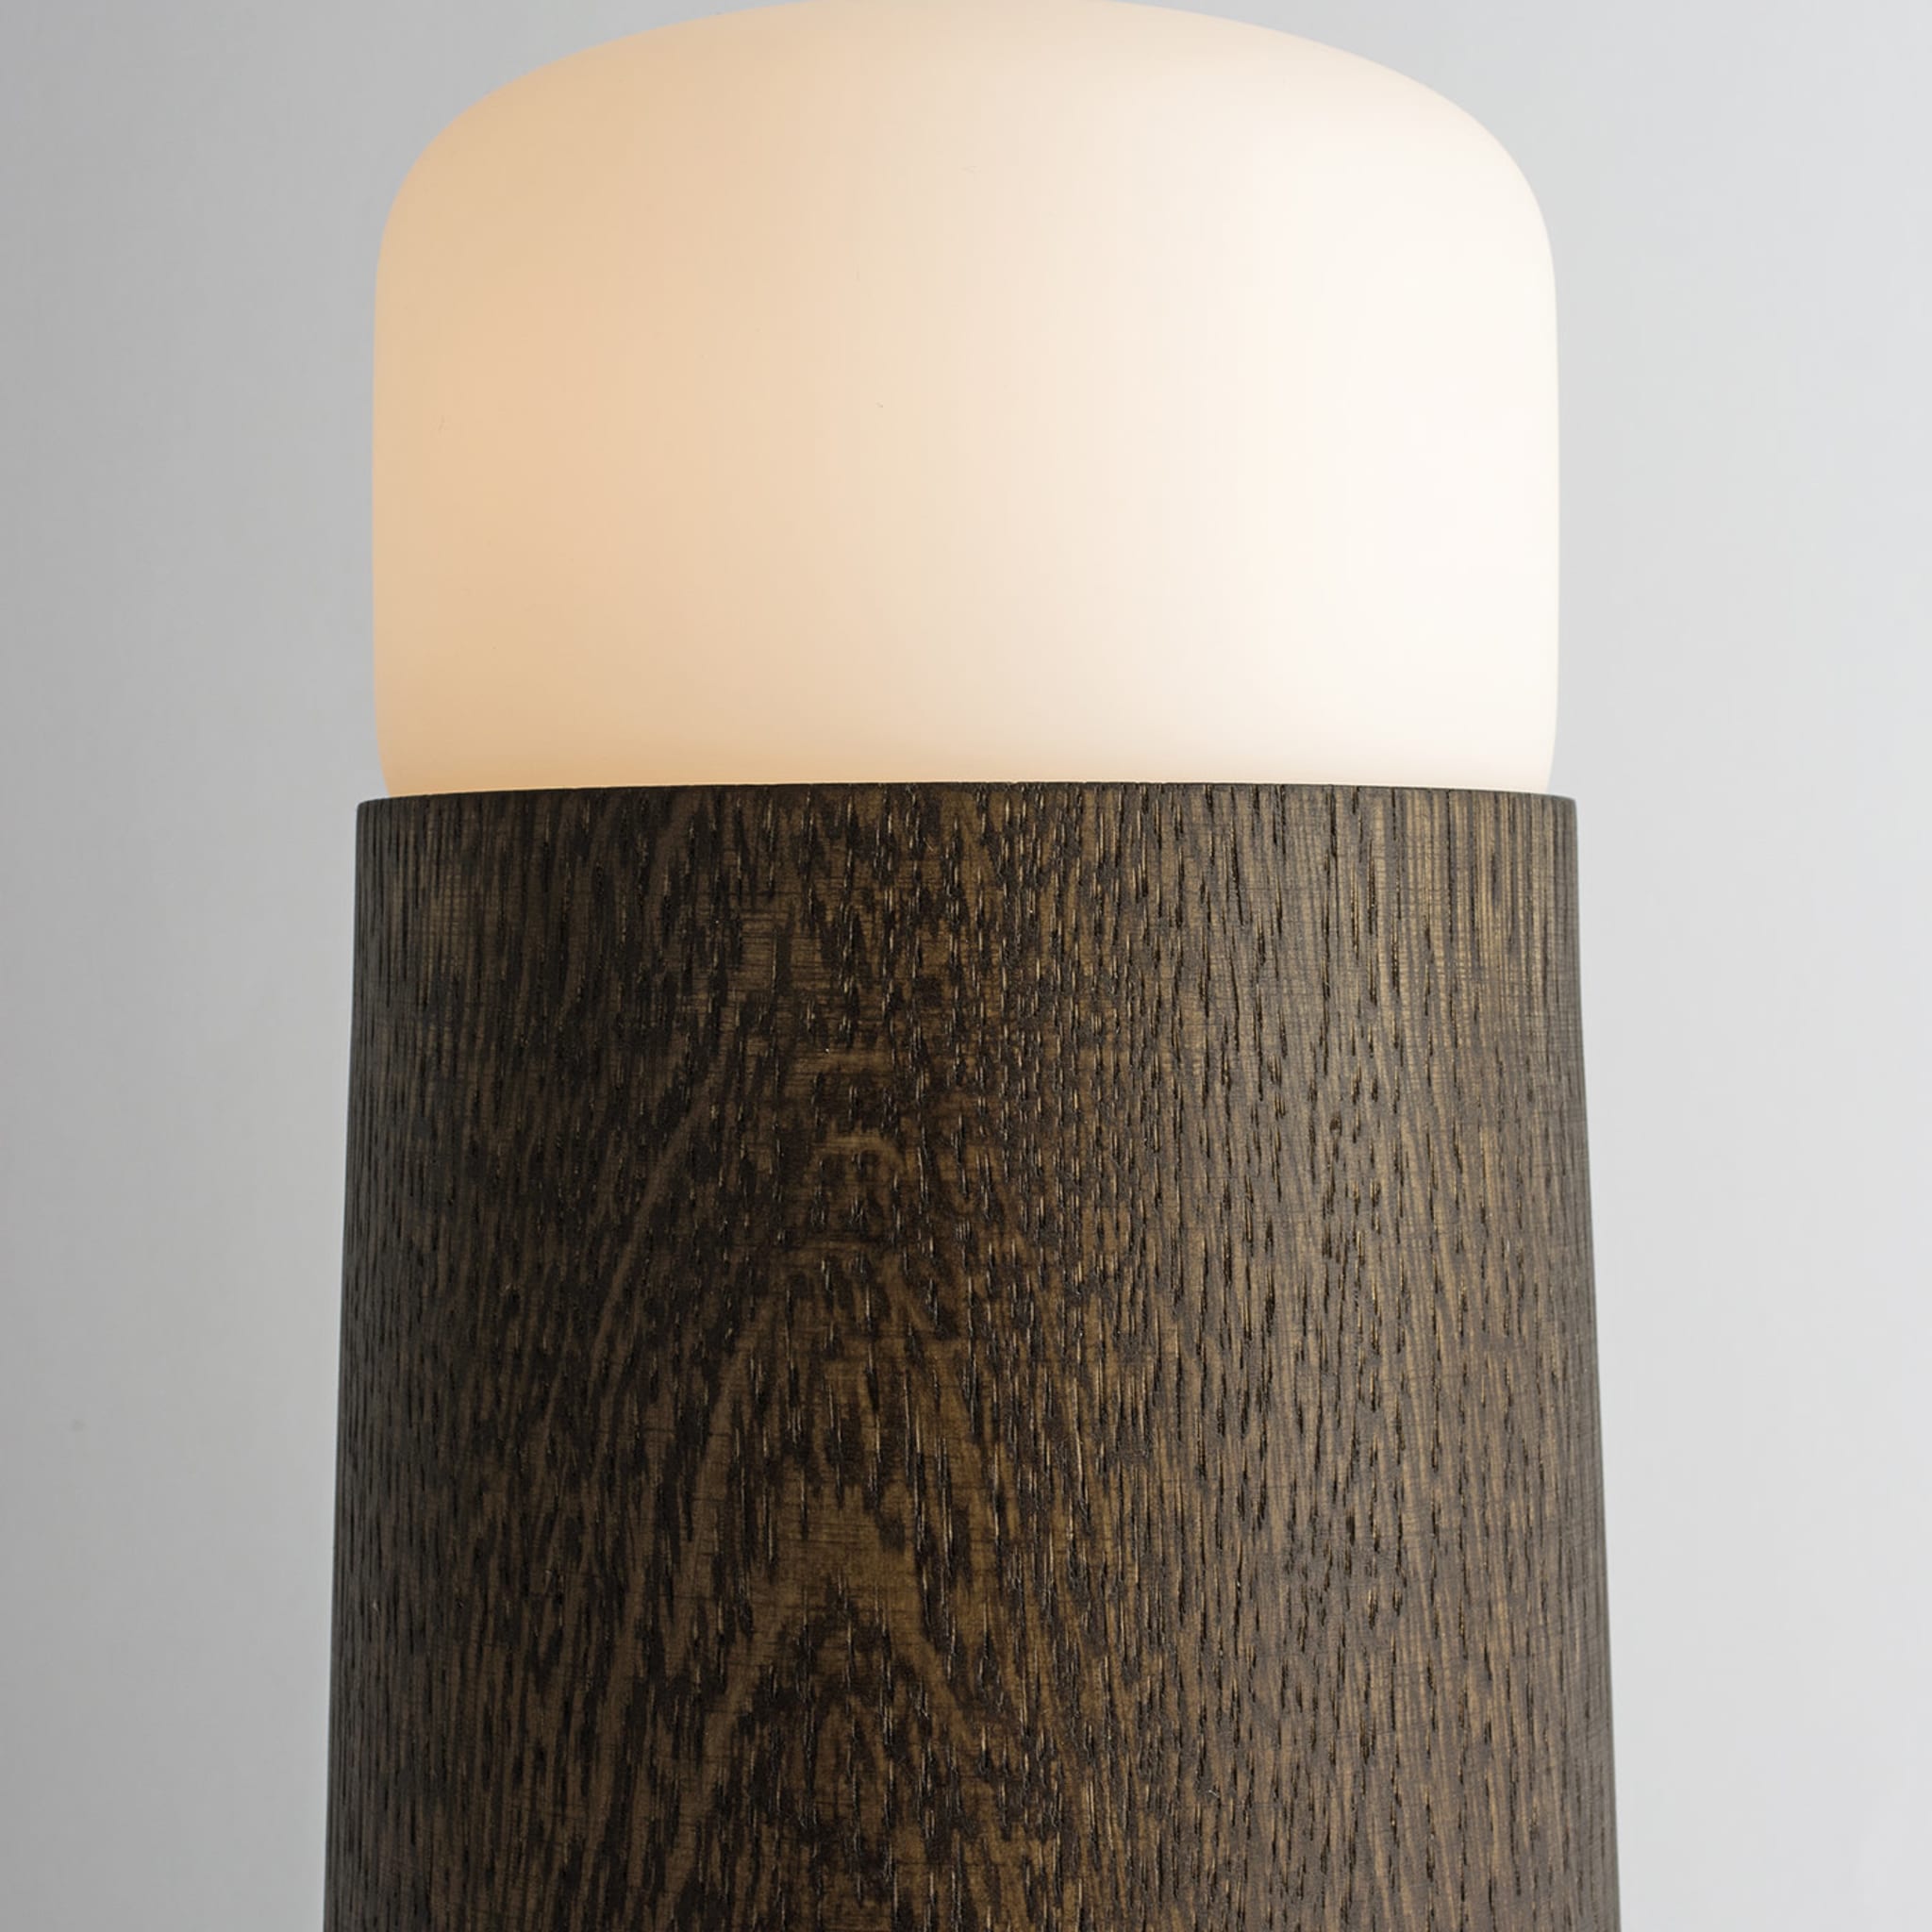 Silo Large Wood Table Lamp by Alalda Design - Alternative view 2